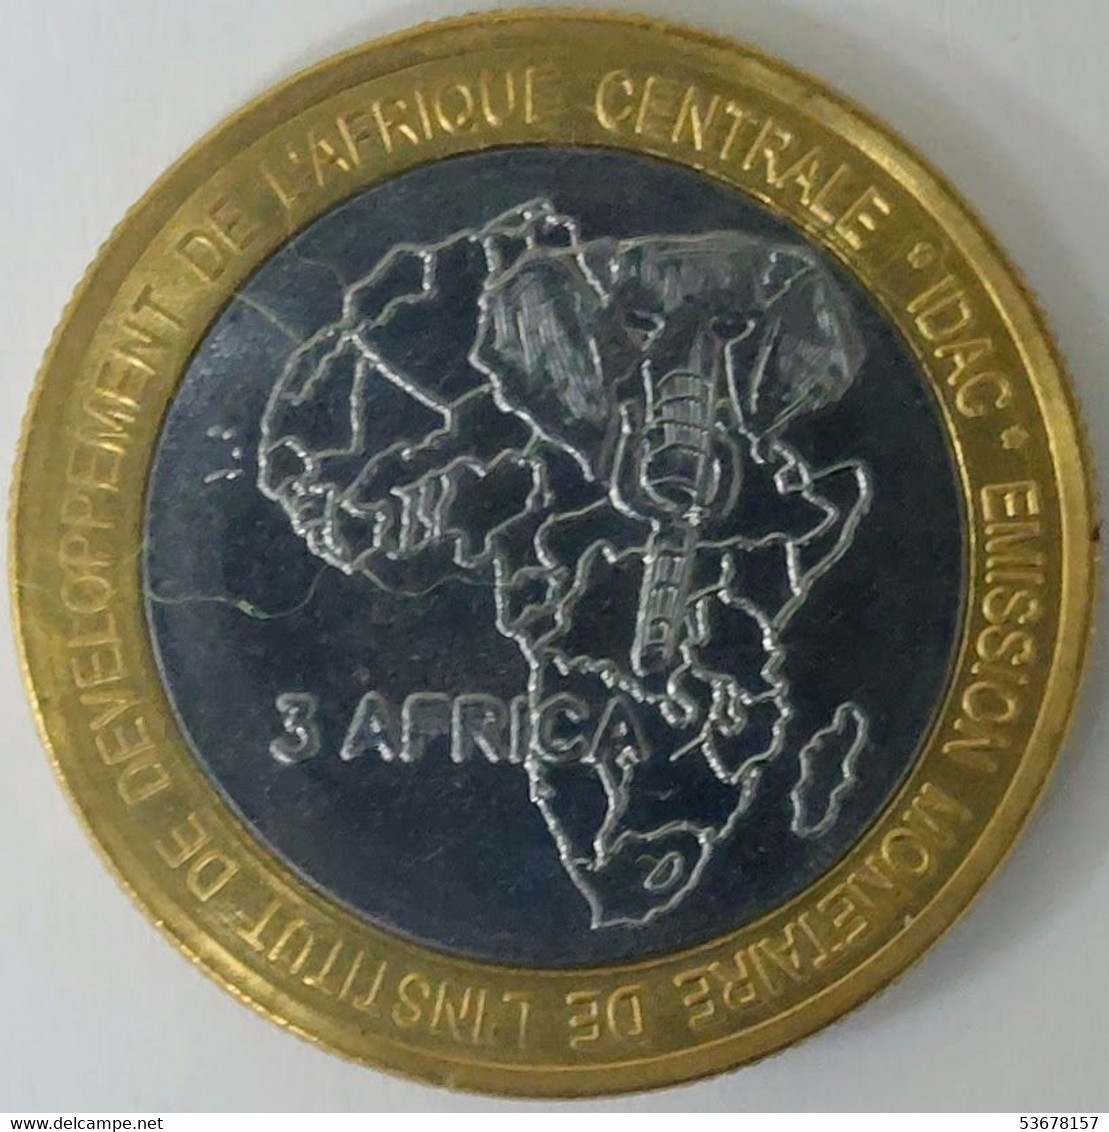 Central African Republic - 4500 CFA Francs (3 Africa), 2007, Pope John Paul II, X# 13 (Fantasy Coin) (1242) - Central African Republic